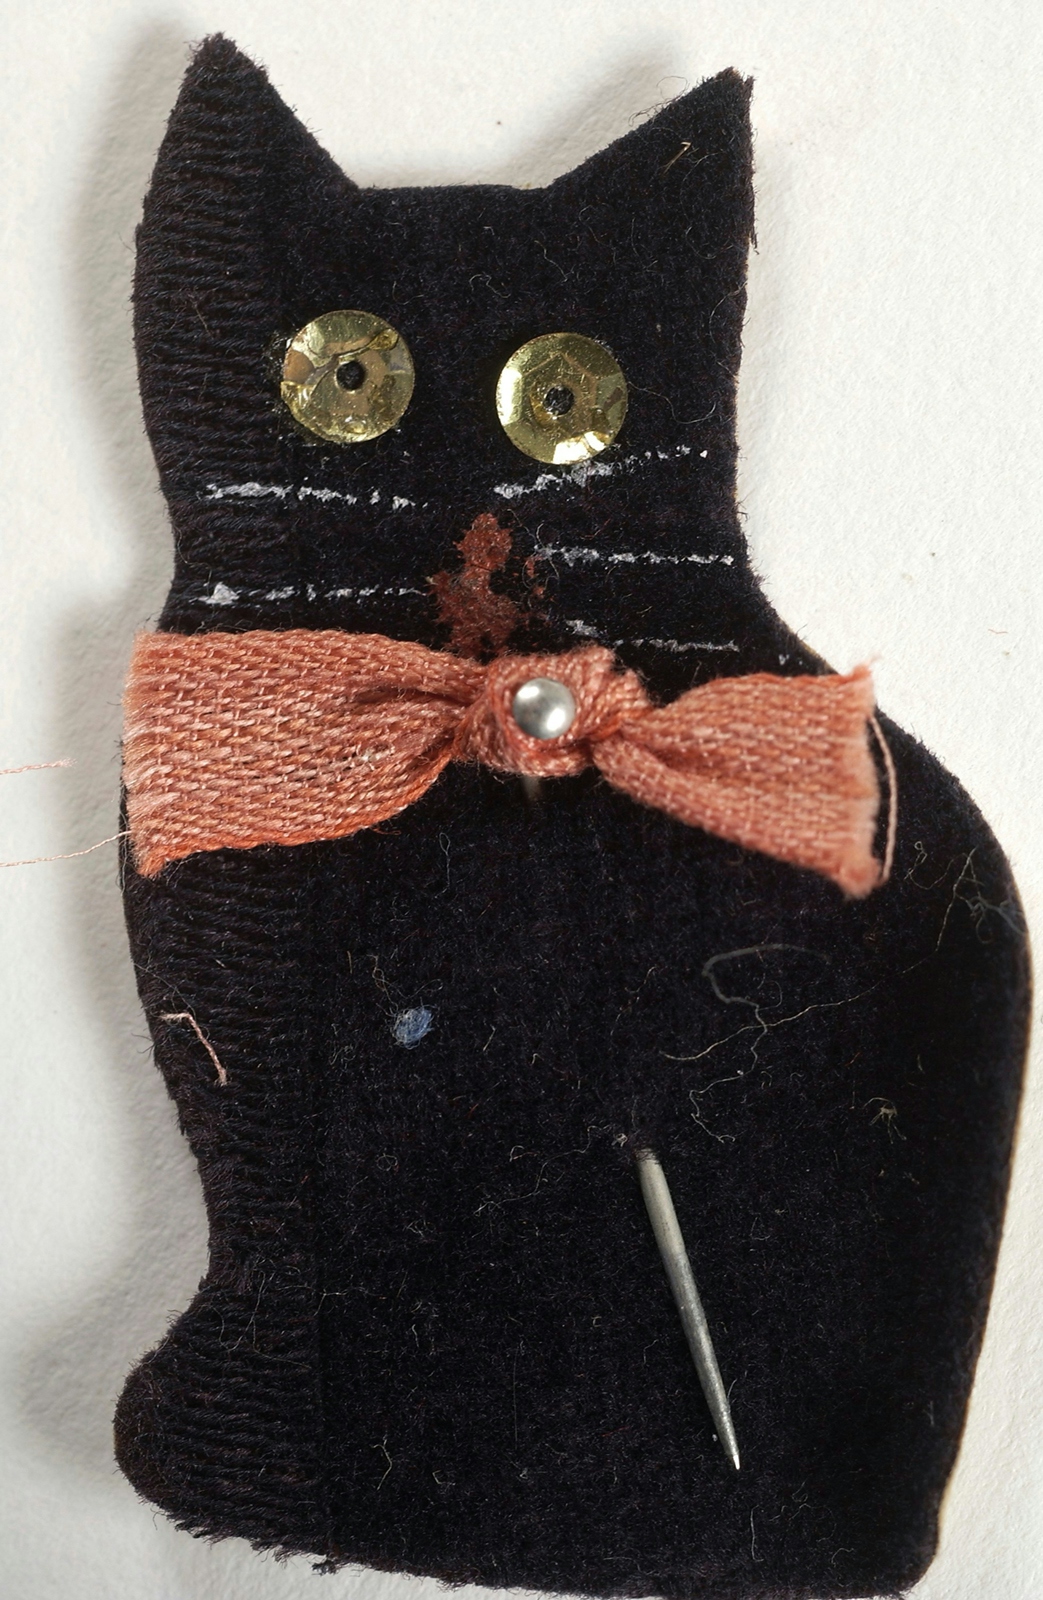 A cat handmade from black fabric, with gold sequins for eyes, and wearing a large pink-red bow on its neck.